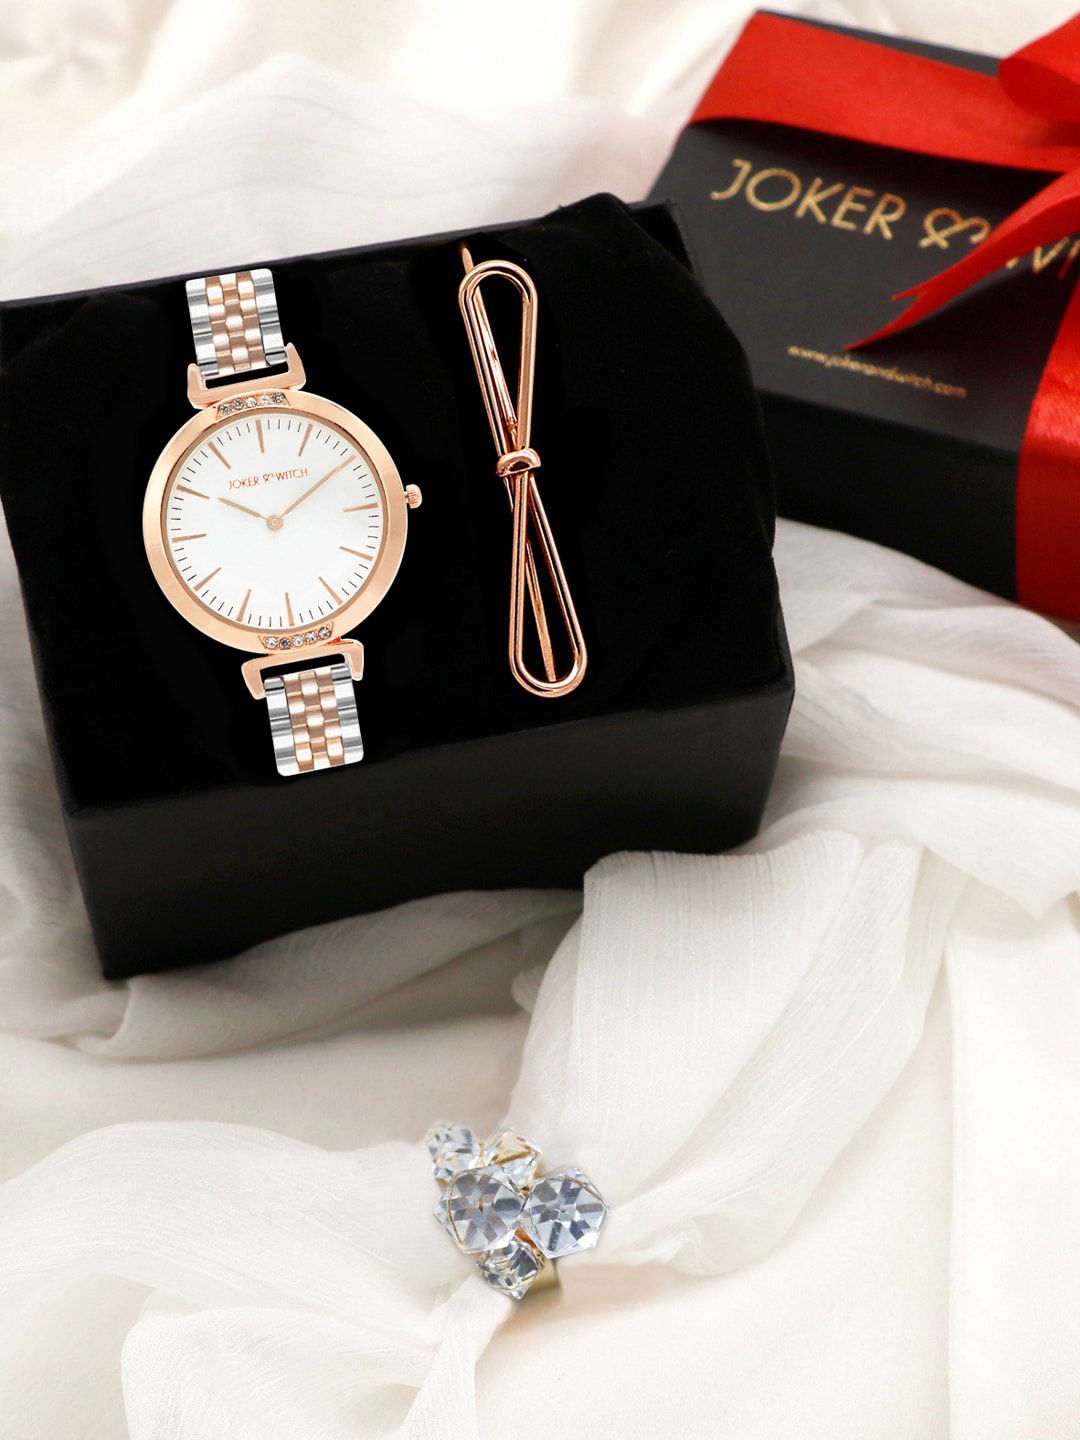 JOKER & WITCH Women Rosegold-Toned & Silver-Toned Love Stack Watch Gift Set JWLT58